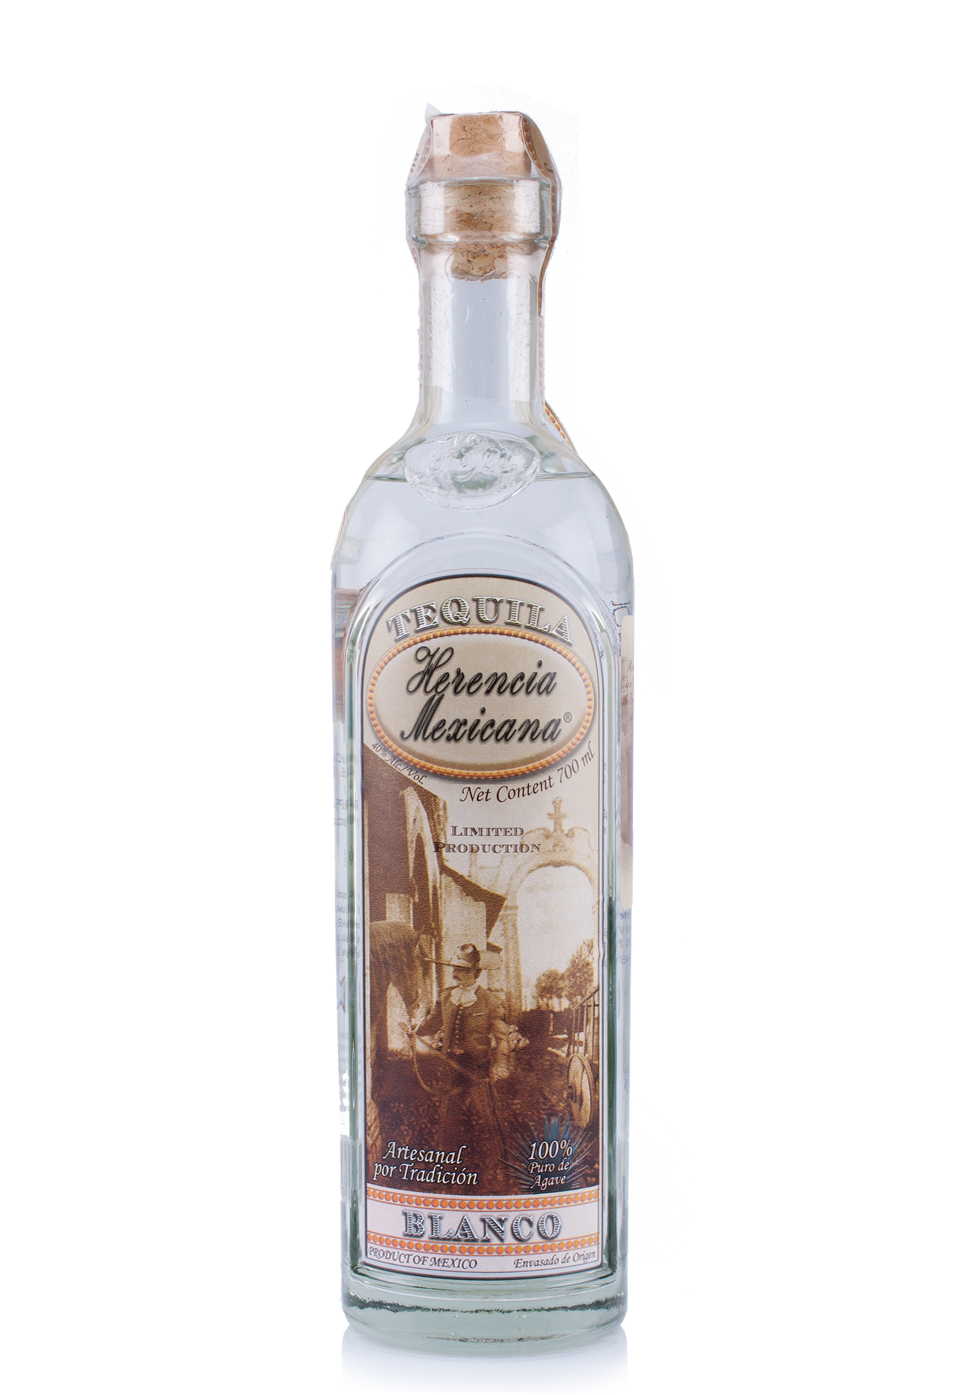 Tequila Herencia Mexicana Blanco (0.7L)